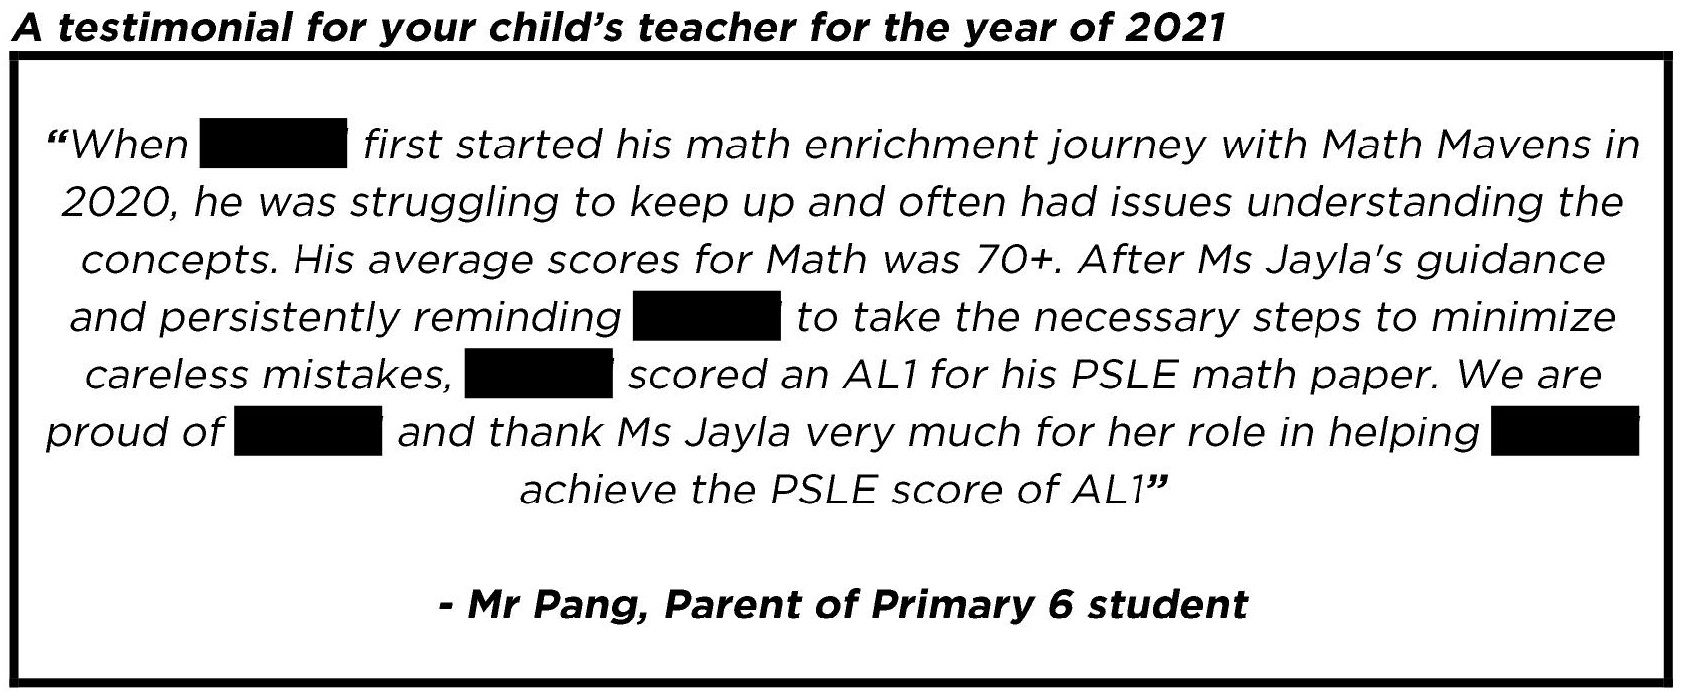 "...scored an AL1 for his PSLE math paper."